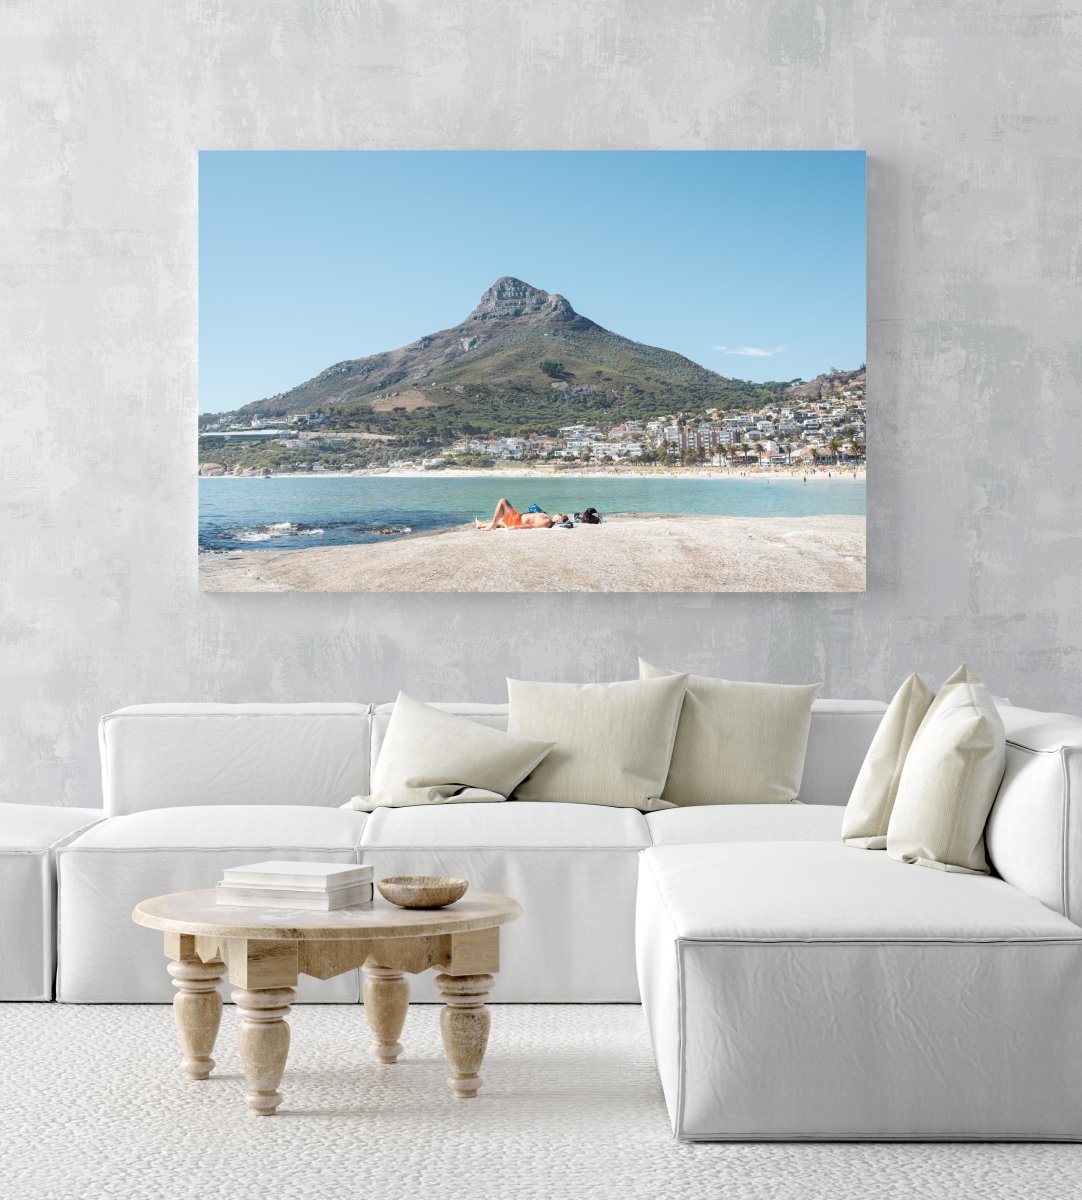 Old man lying on rock at Camps Bay beach below lions head in an acrylic/perspex frame